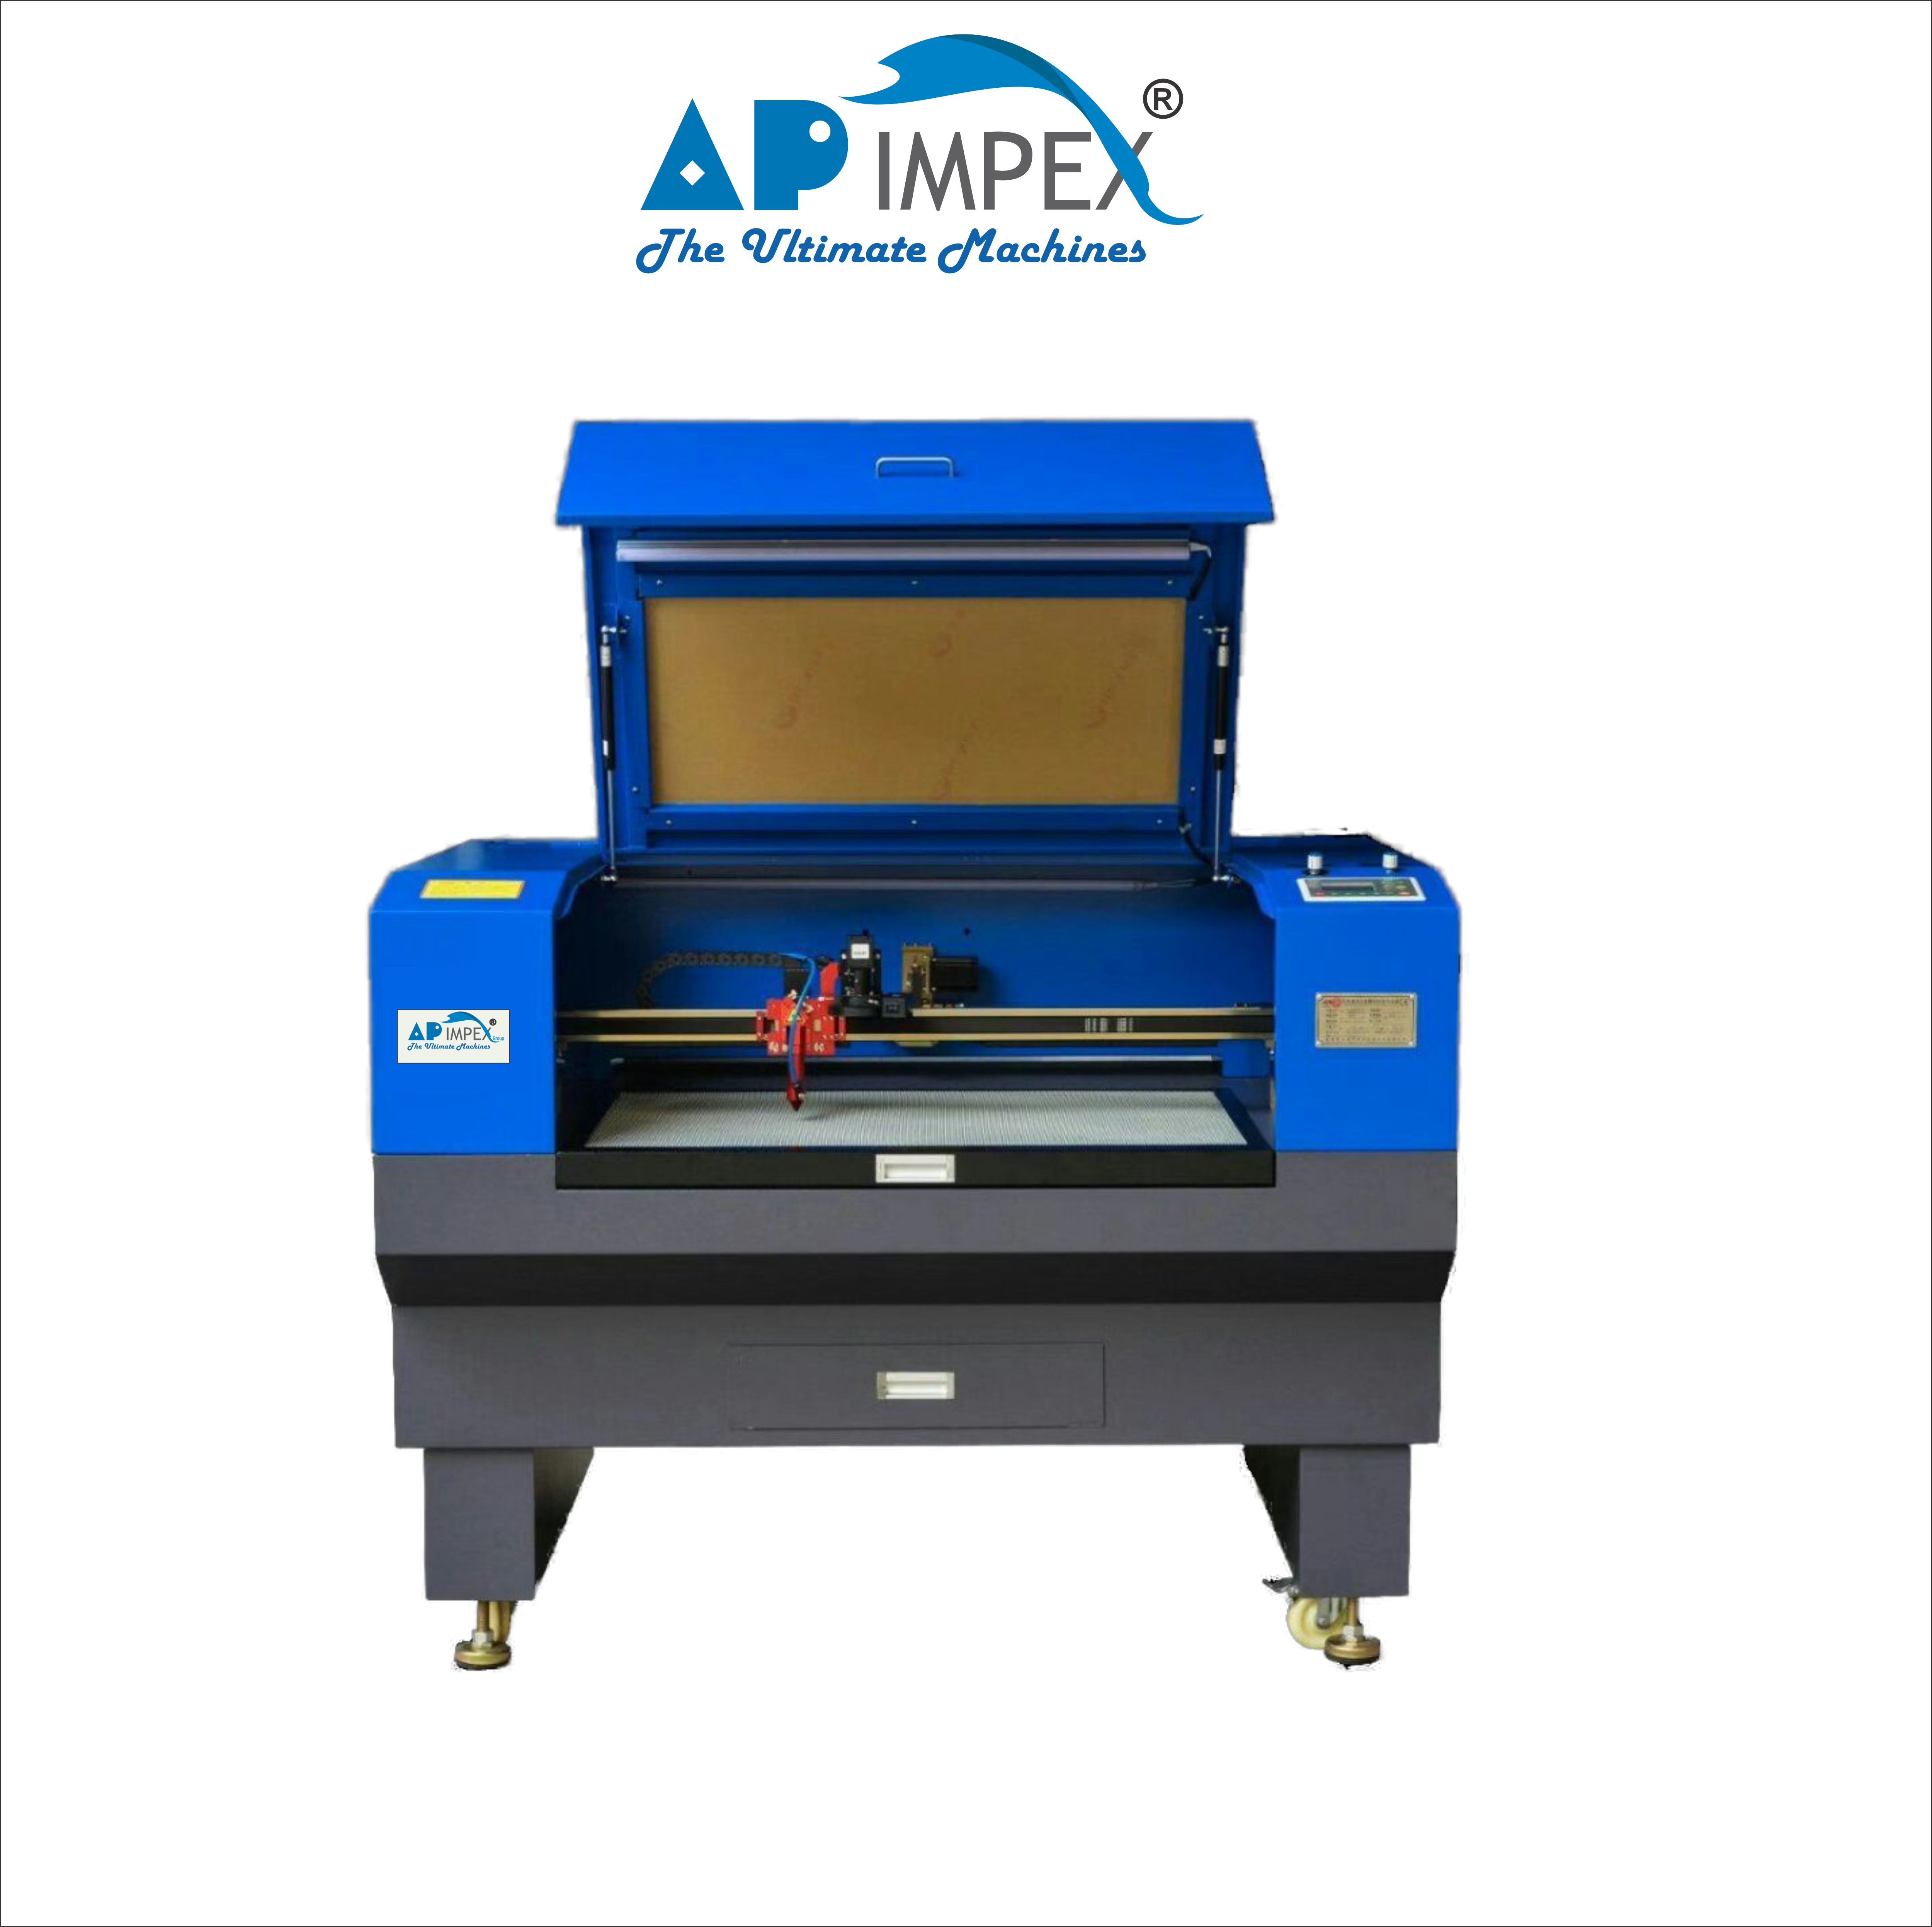 Automatic Co2 Laser Engraving Machine